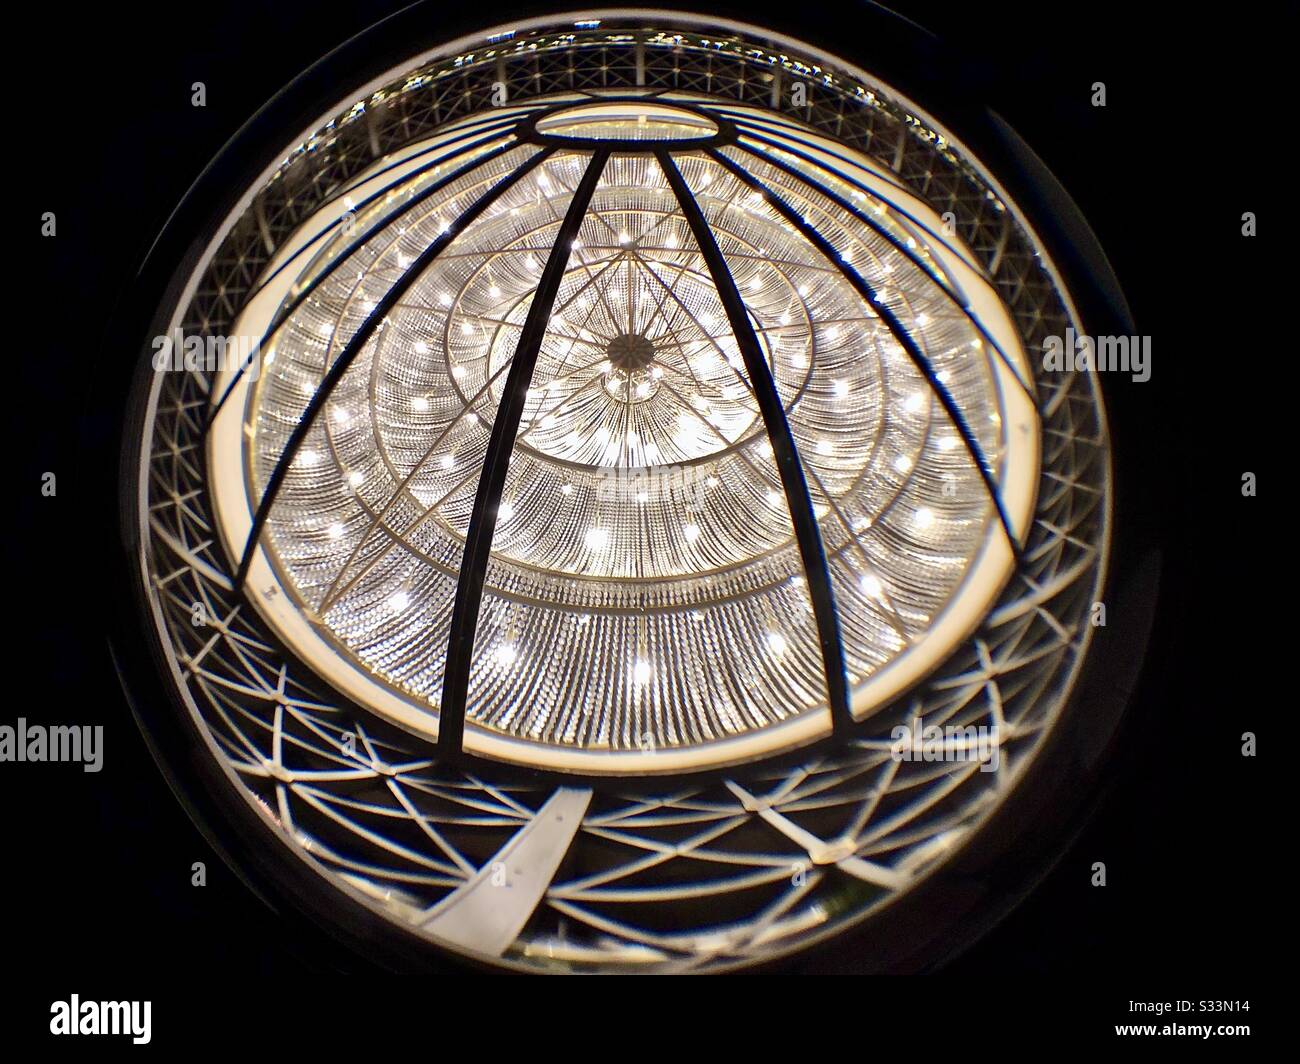 Unique perspective of an interior dome in the floor below.  Surrounded by a railing, and lit from below. Stock Photo